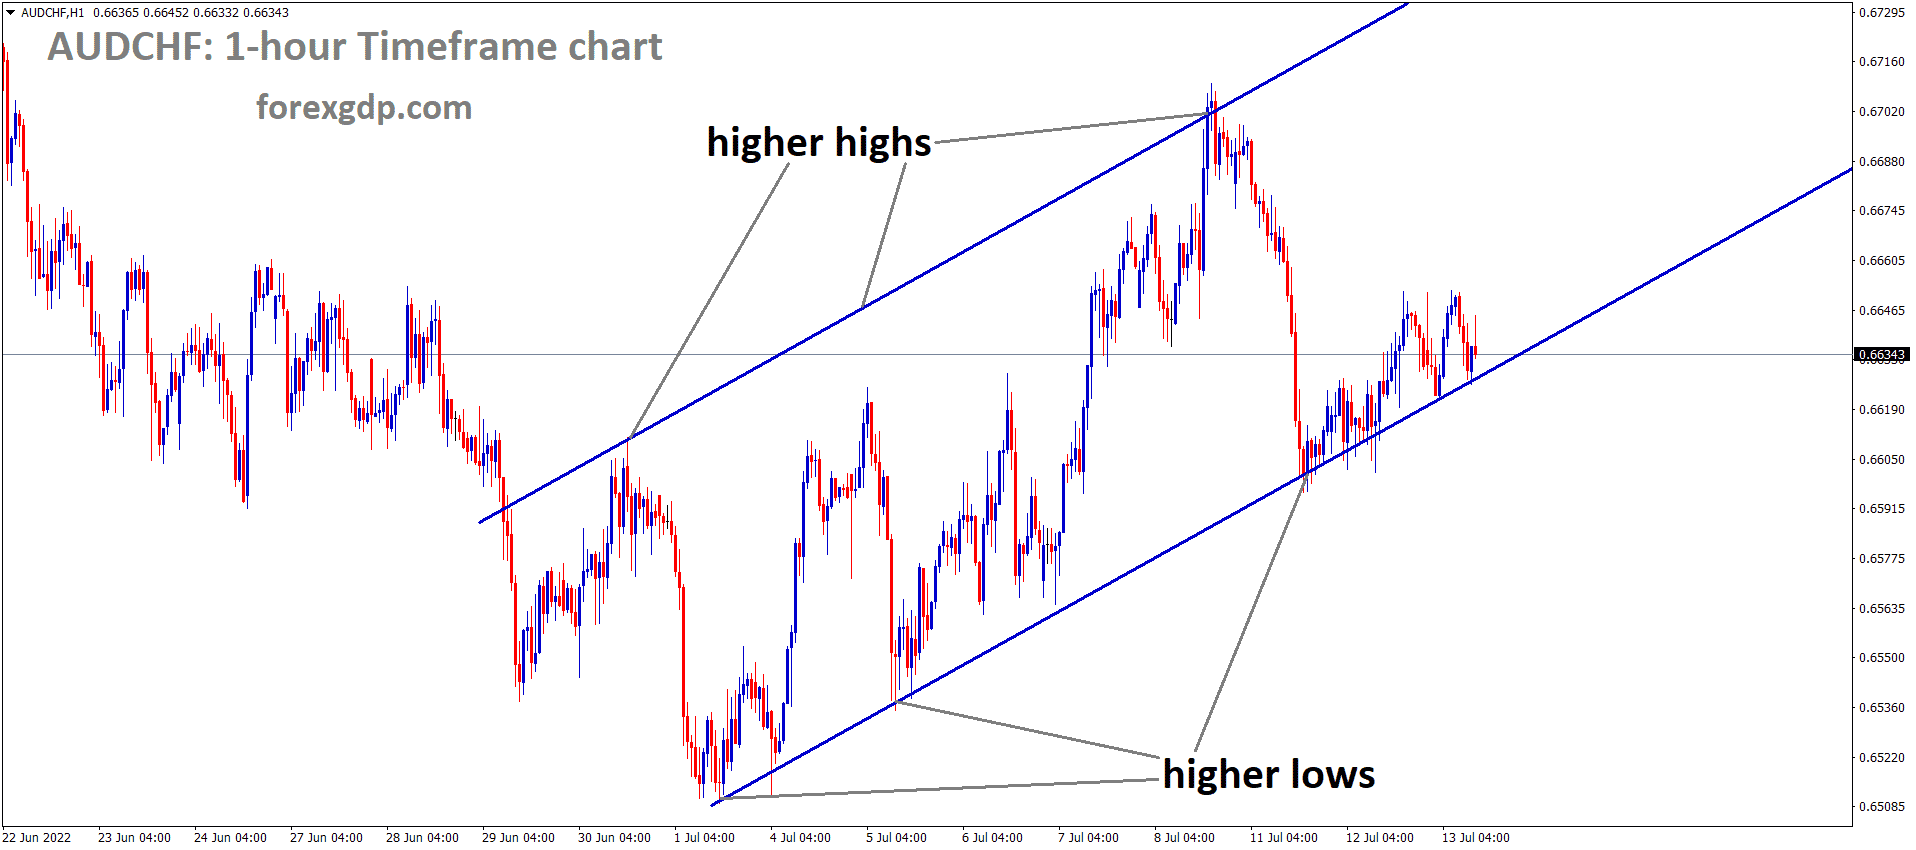 AUDCHF is moving in an Ascending channel and the Market has reached the higher low area of the channel